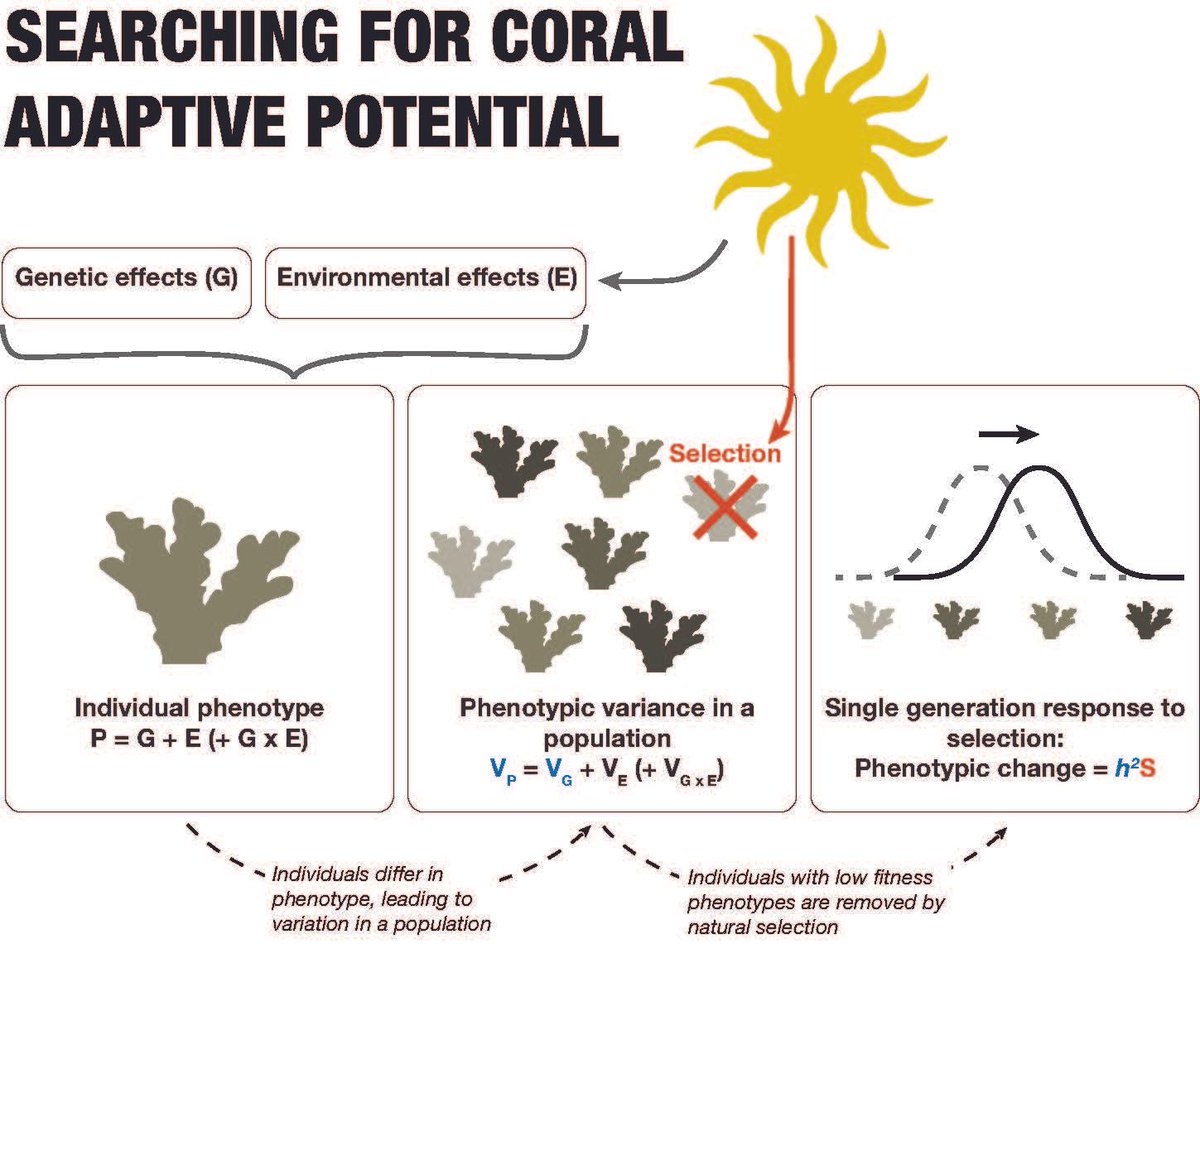 OPINION Moving beyond heritability in the search for coral adaptive potential 📄 bit.ly/3UIgfCK @dcceew @UQScience @t__richards @KatrinaMcGuiga3 @adriana_humanes @petemumby @CRiginos #RRAP